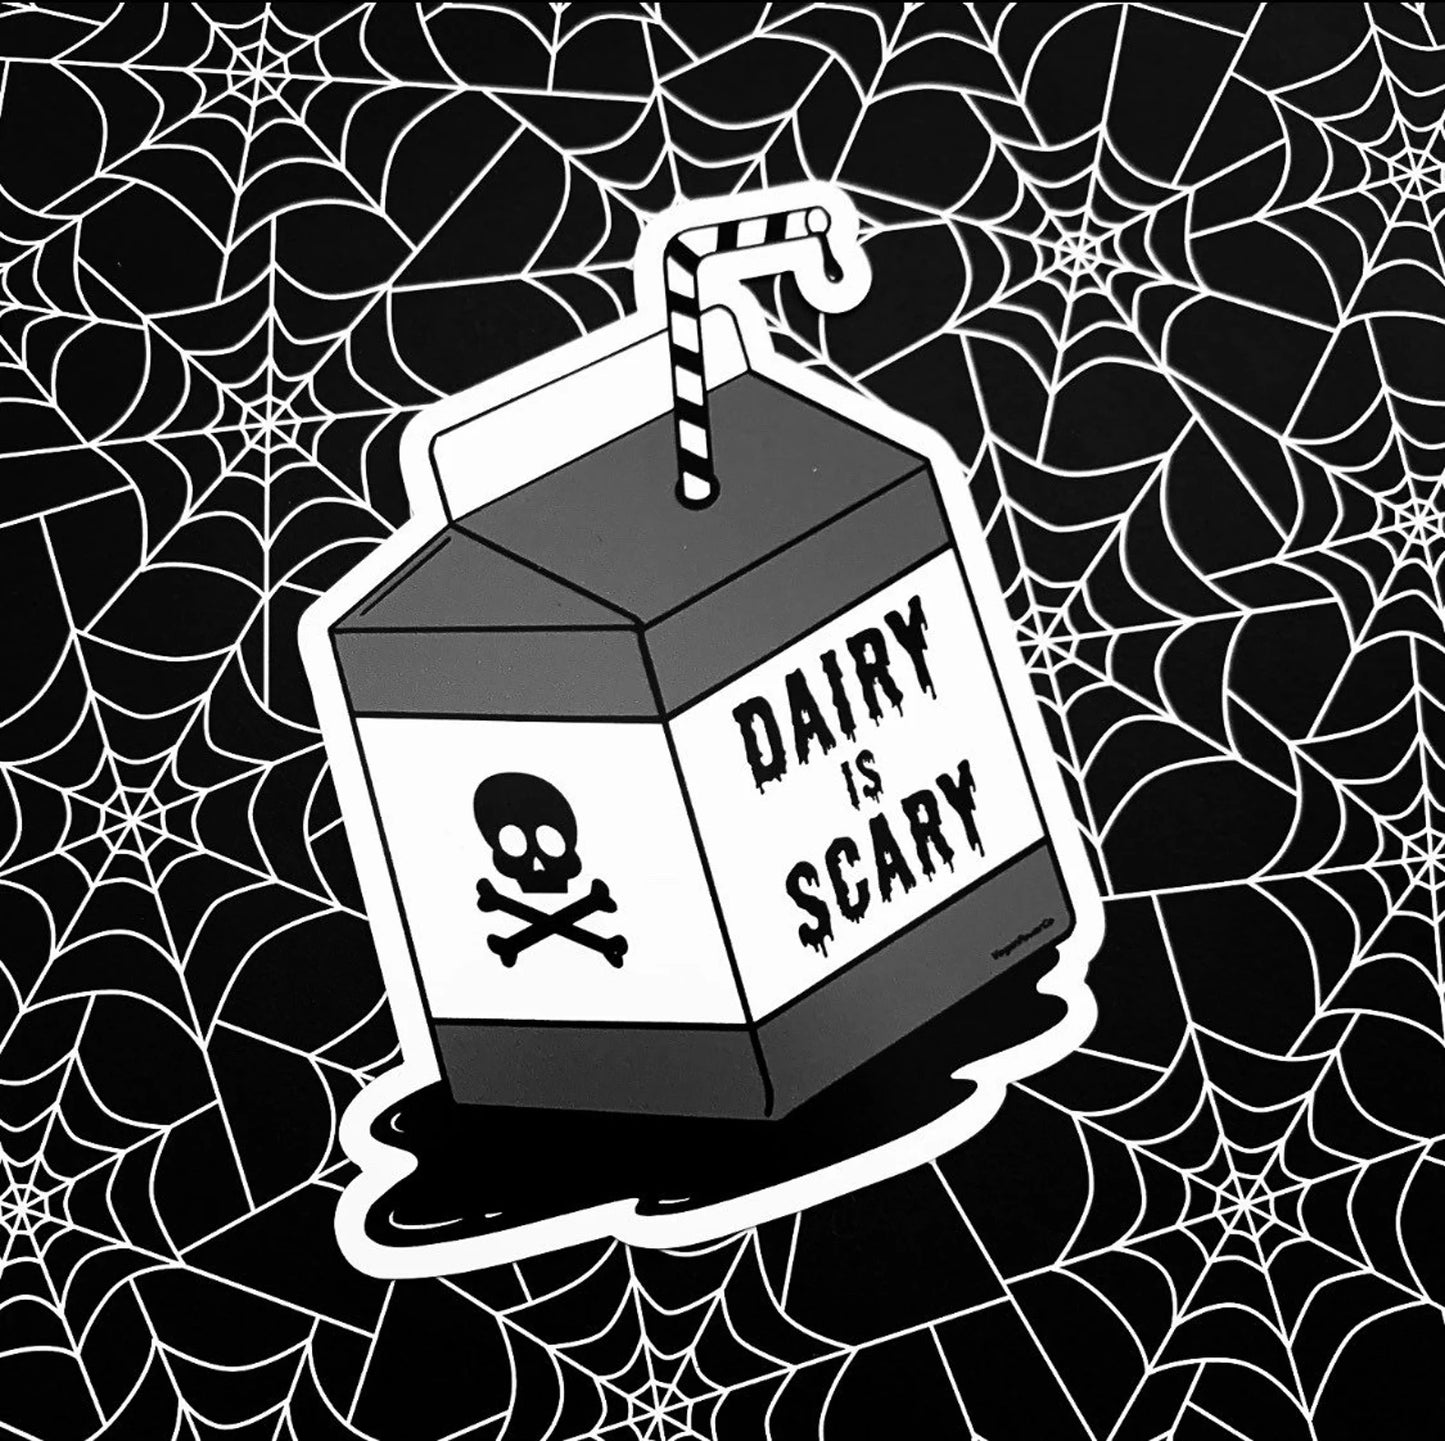 Dairy is Scary Sticker